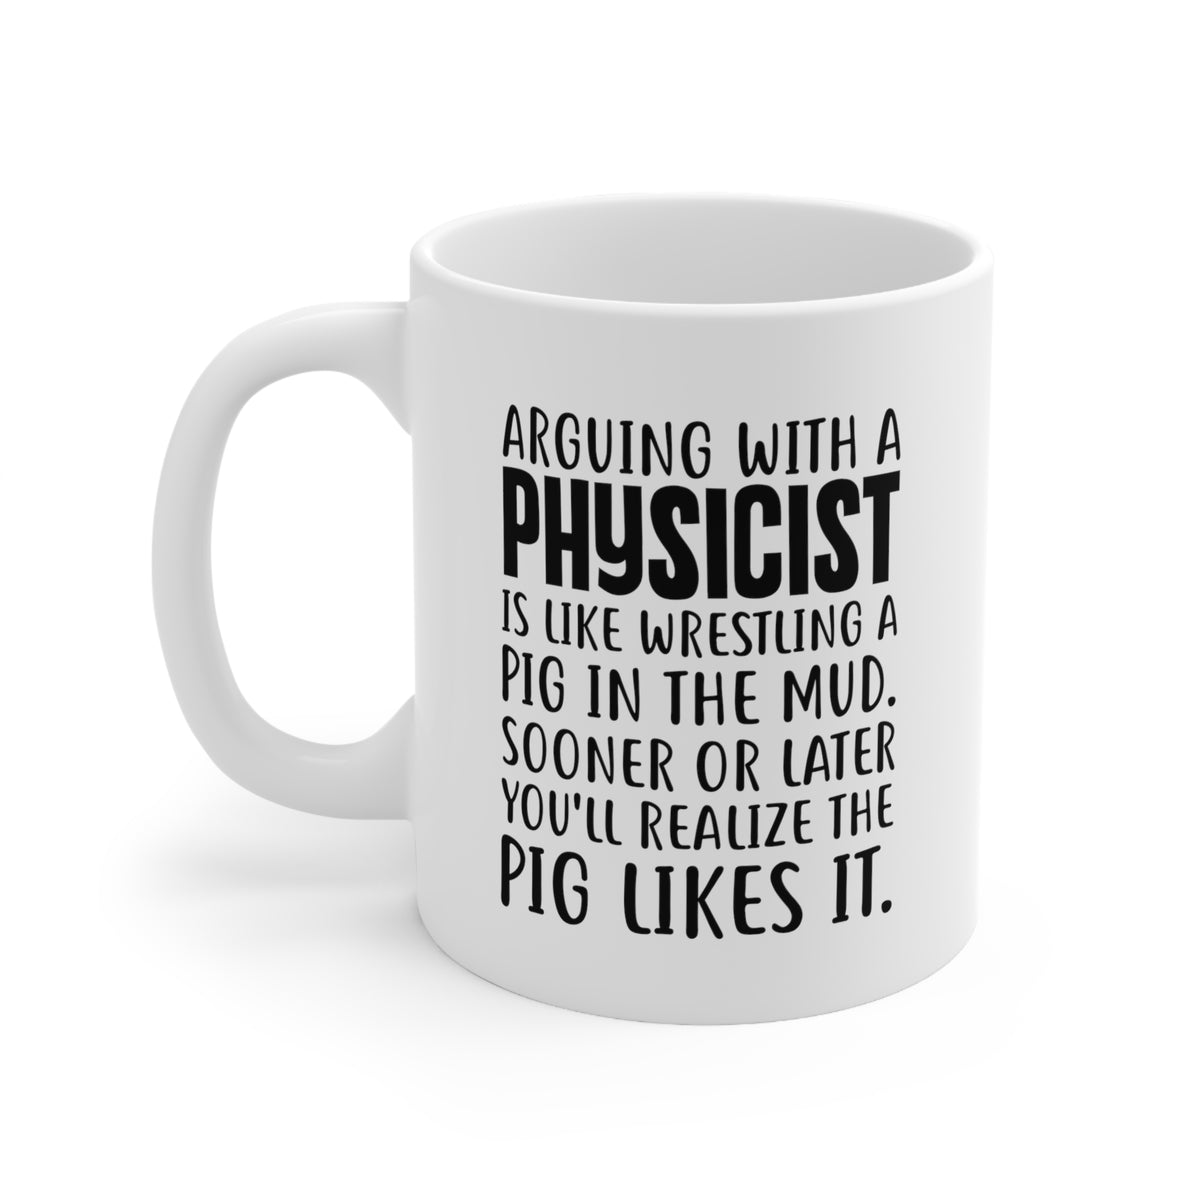 Funny Physicist 11oz Coffee Mug - Arguing With A Physicist Is Like Wrestling A Pig In The Mud - Best Inspirational Gifts and Sarcasm